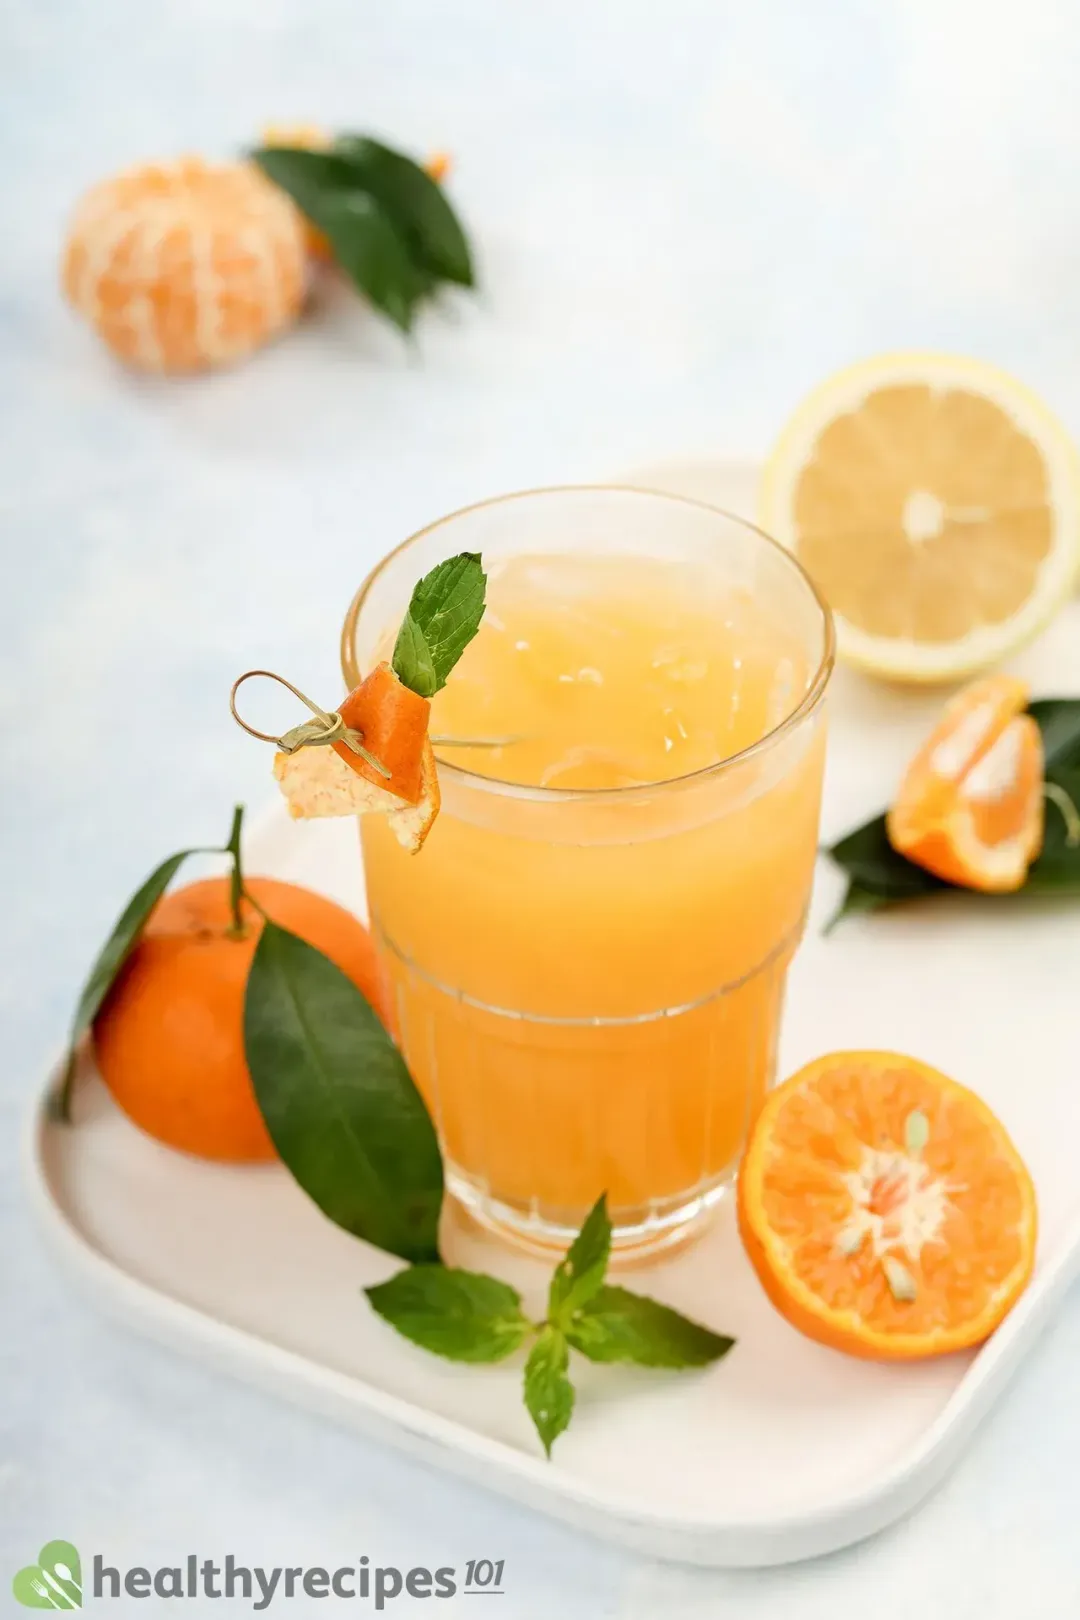 Tangerine Juice Recipe: A Tasty Drink To Keep In The Fridge All Summer